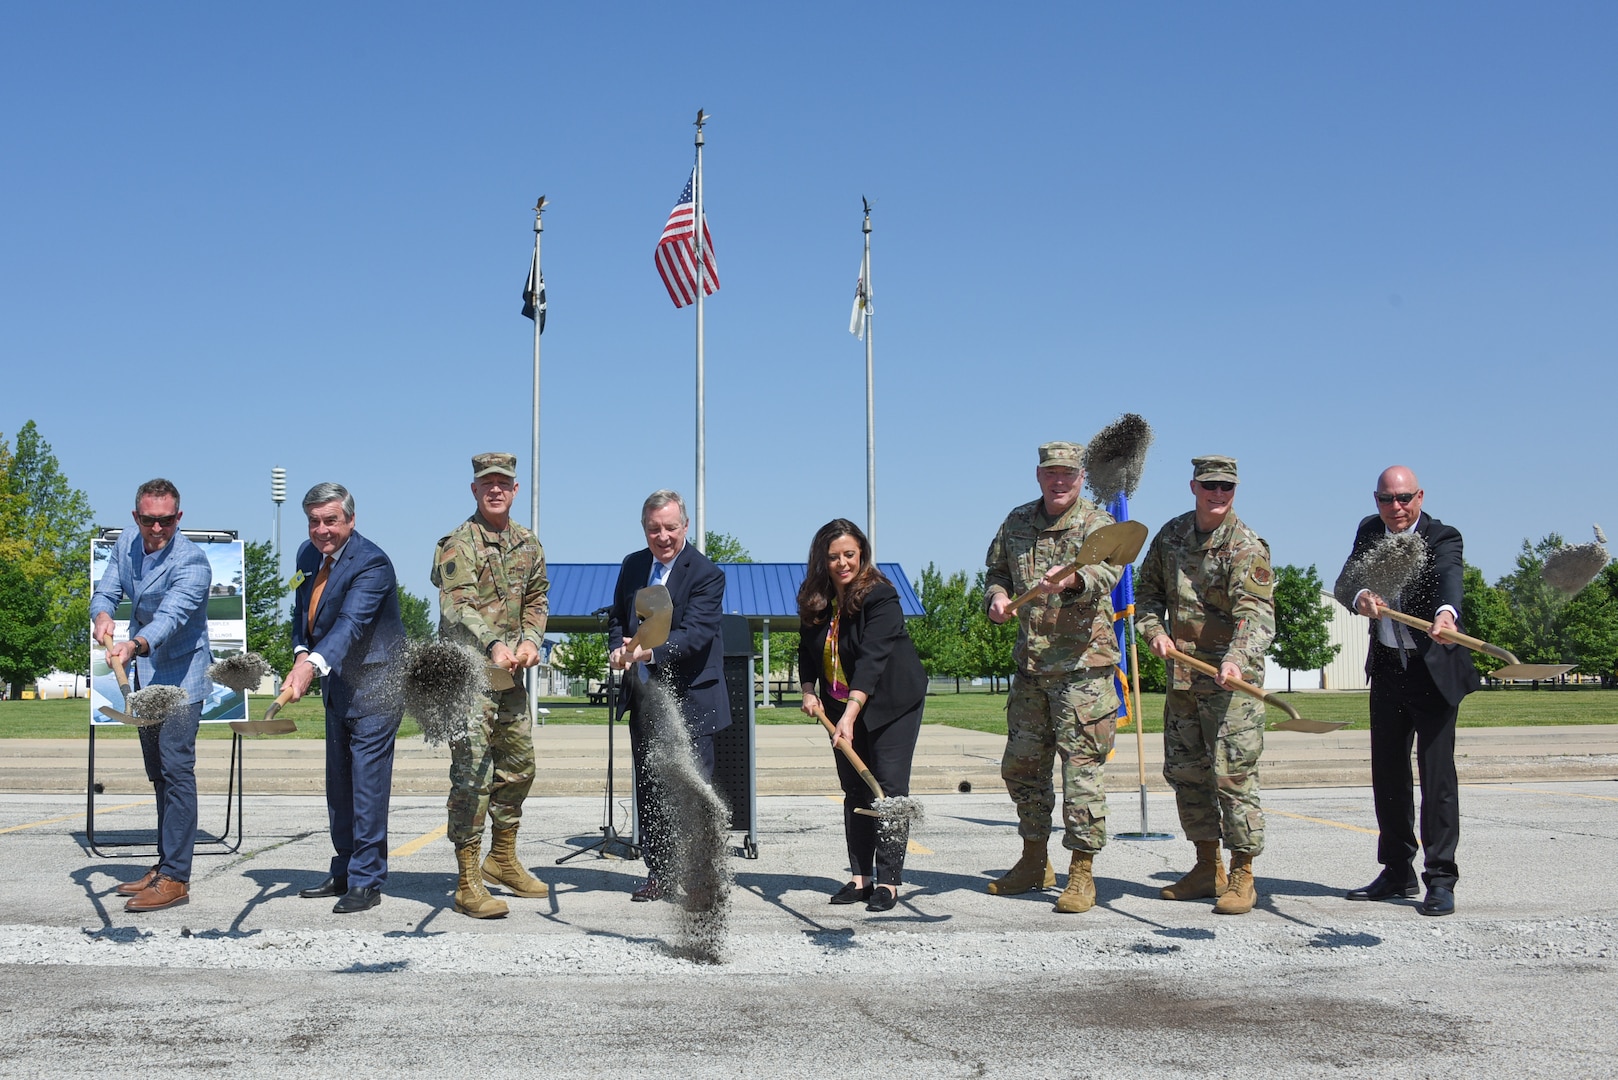 U.S. Sen. Richard Durbin (center) and Maj. Gen. Rich Neely, third from left, the Adjutant General of Illinois and Commander of the Illinois National Guard, are joined by Jason Litteken, the President of Litteken Construction, the general contractor for the project Sergio Pecori, the Chief Executive Officer of Hanson Professional Services, which designed the project, Springfield Mayor Misty Buscher, Brig. Gen. Dan McDonough, Assistant Adjutant General – Air and Commander of the Illinois Air National Guard, Col. Robert Gellner, Commander of the 183rd Wing, and Col. (ret.) Randy Sikowski, the Downstate Director for U.S. Sen. Tammy Duckworth, at the groundbreaking ceremony for a $13.4 million 24,000-square-foot Base Civil Engineer Complex at the 183rd Wing on Abraham Lincoln Capital Airport.